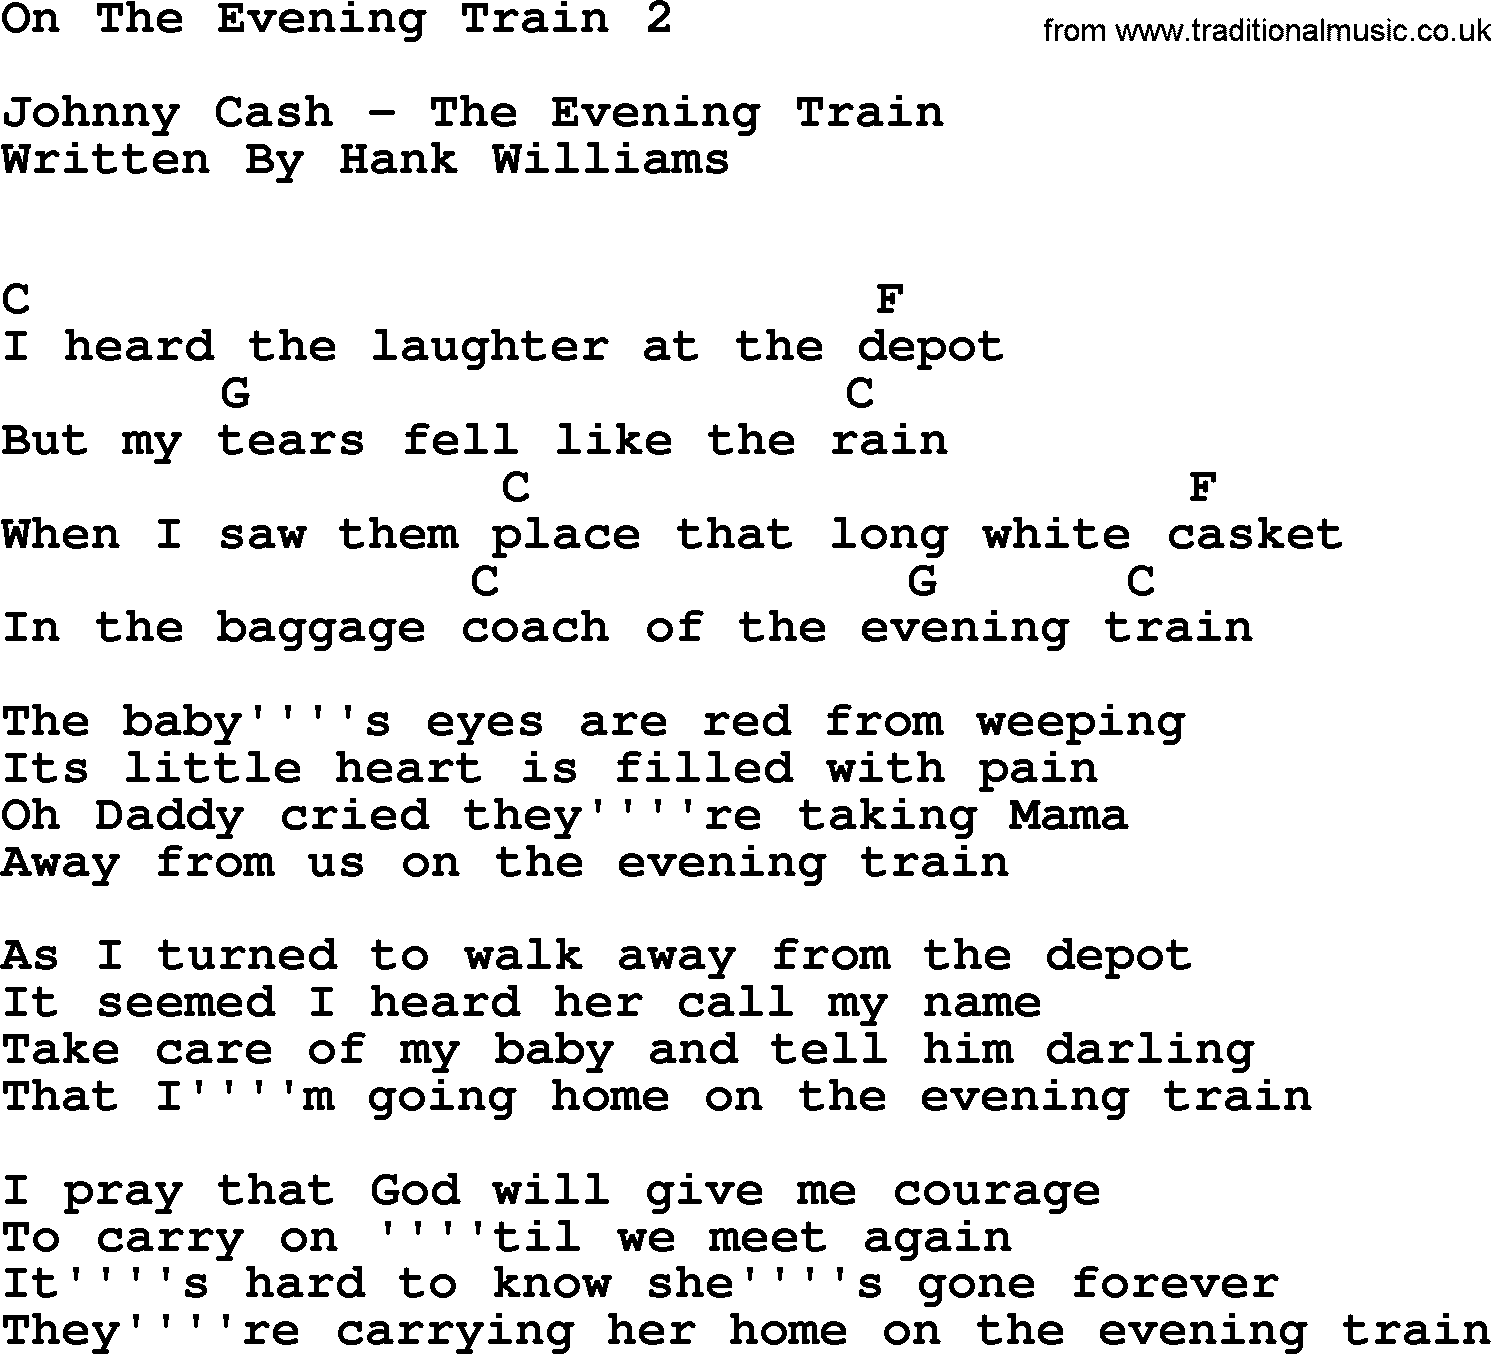 Johnny Cash song On The Evening Train 2, lyrics and chords